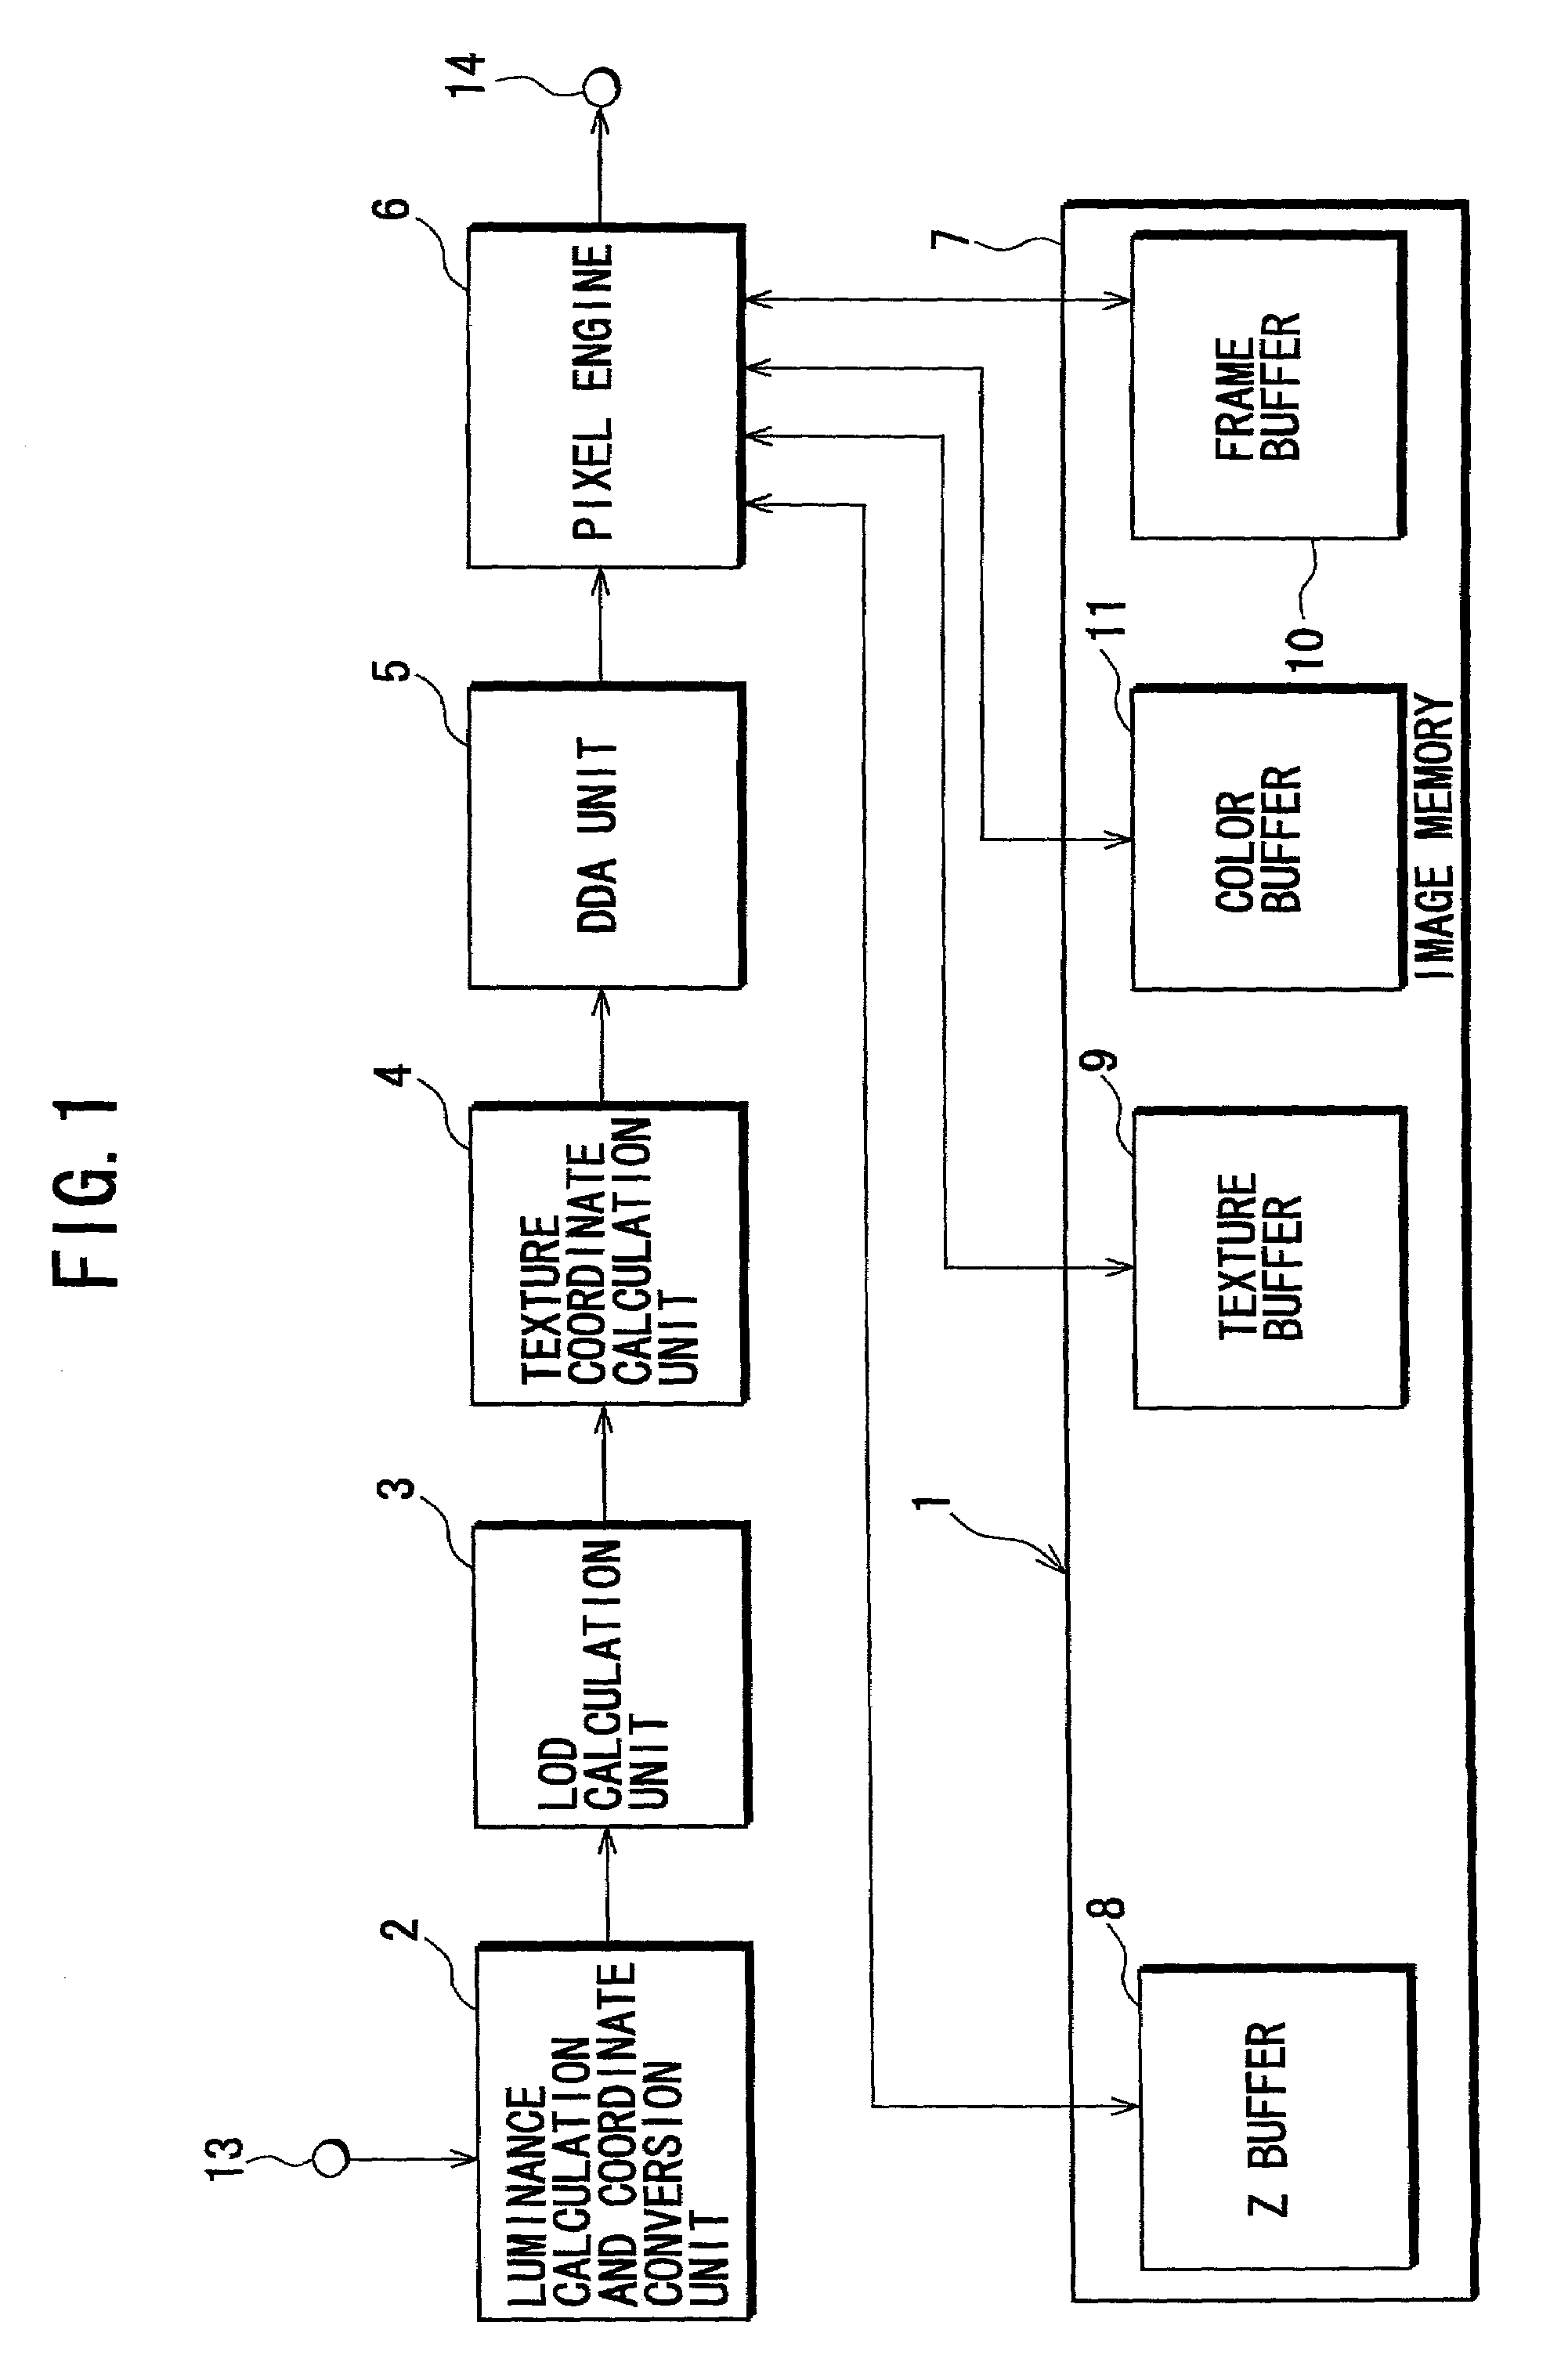 Image processing method for generating three-dimensional images on a two-dimensional screen